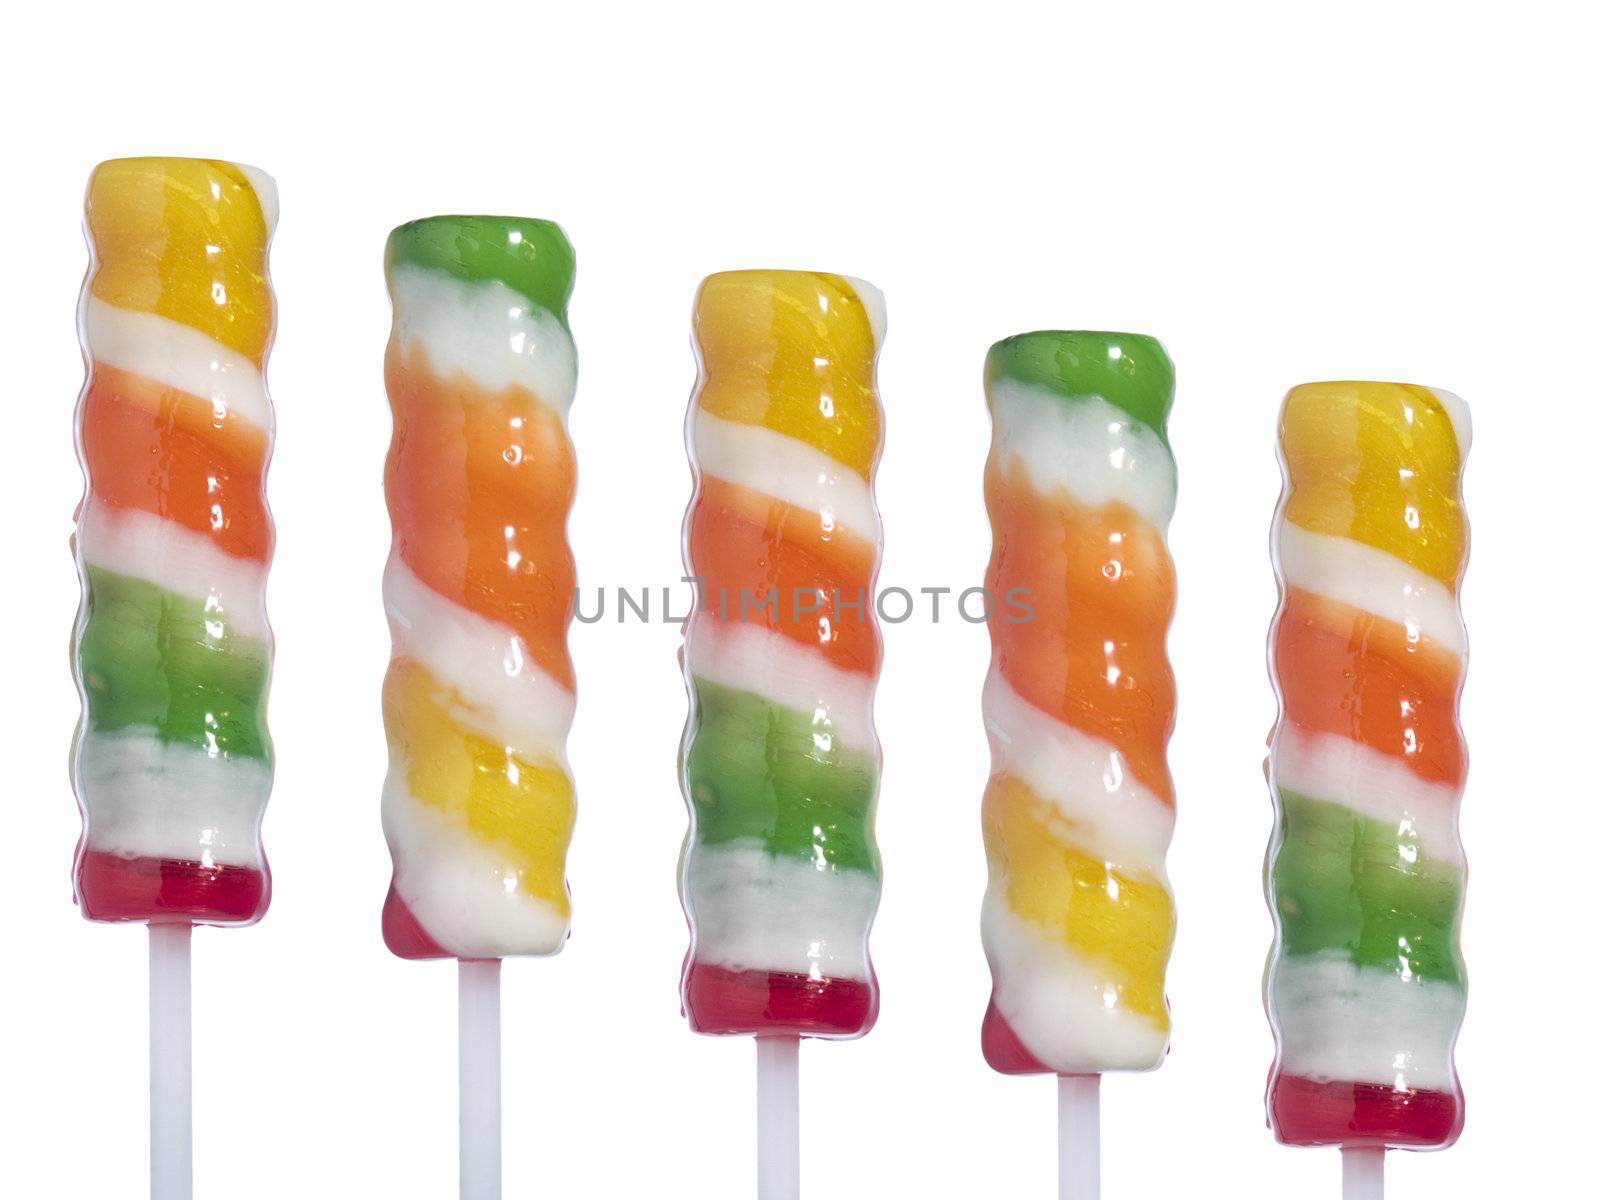 Five lollipop sticks isolated over white background.